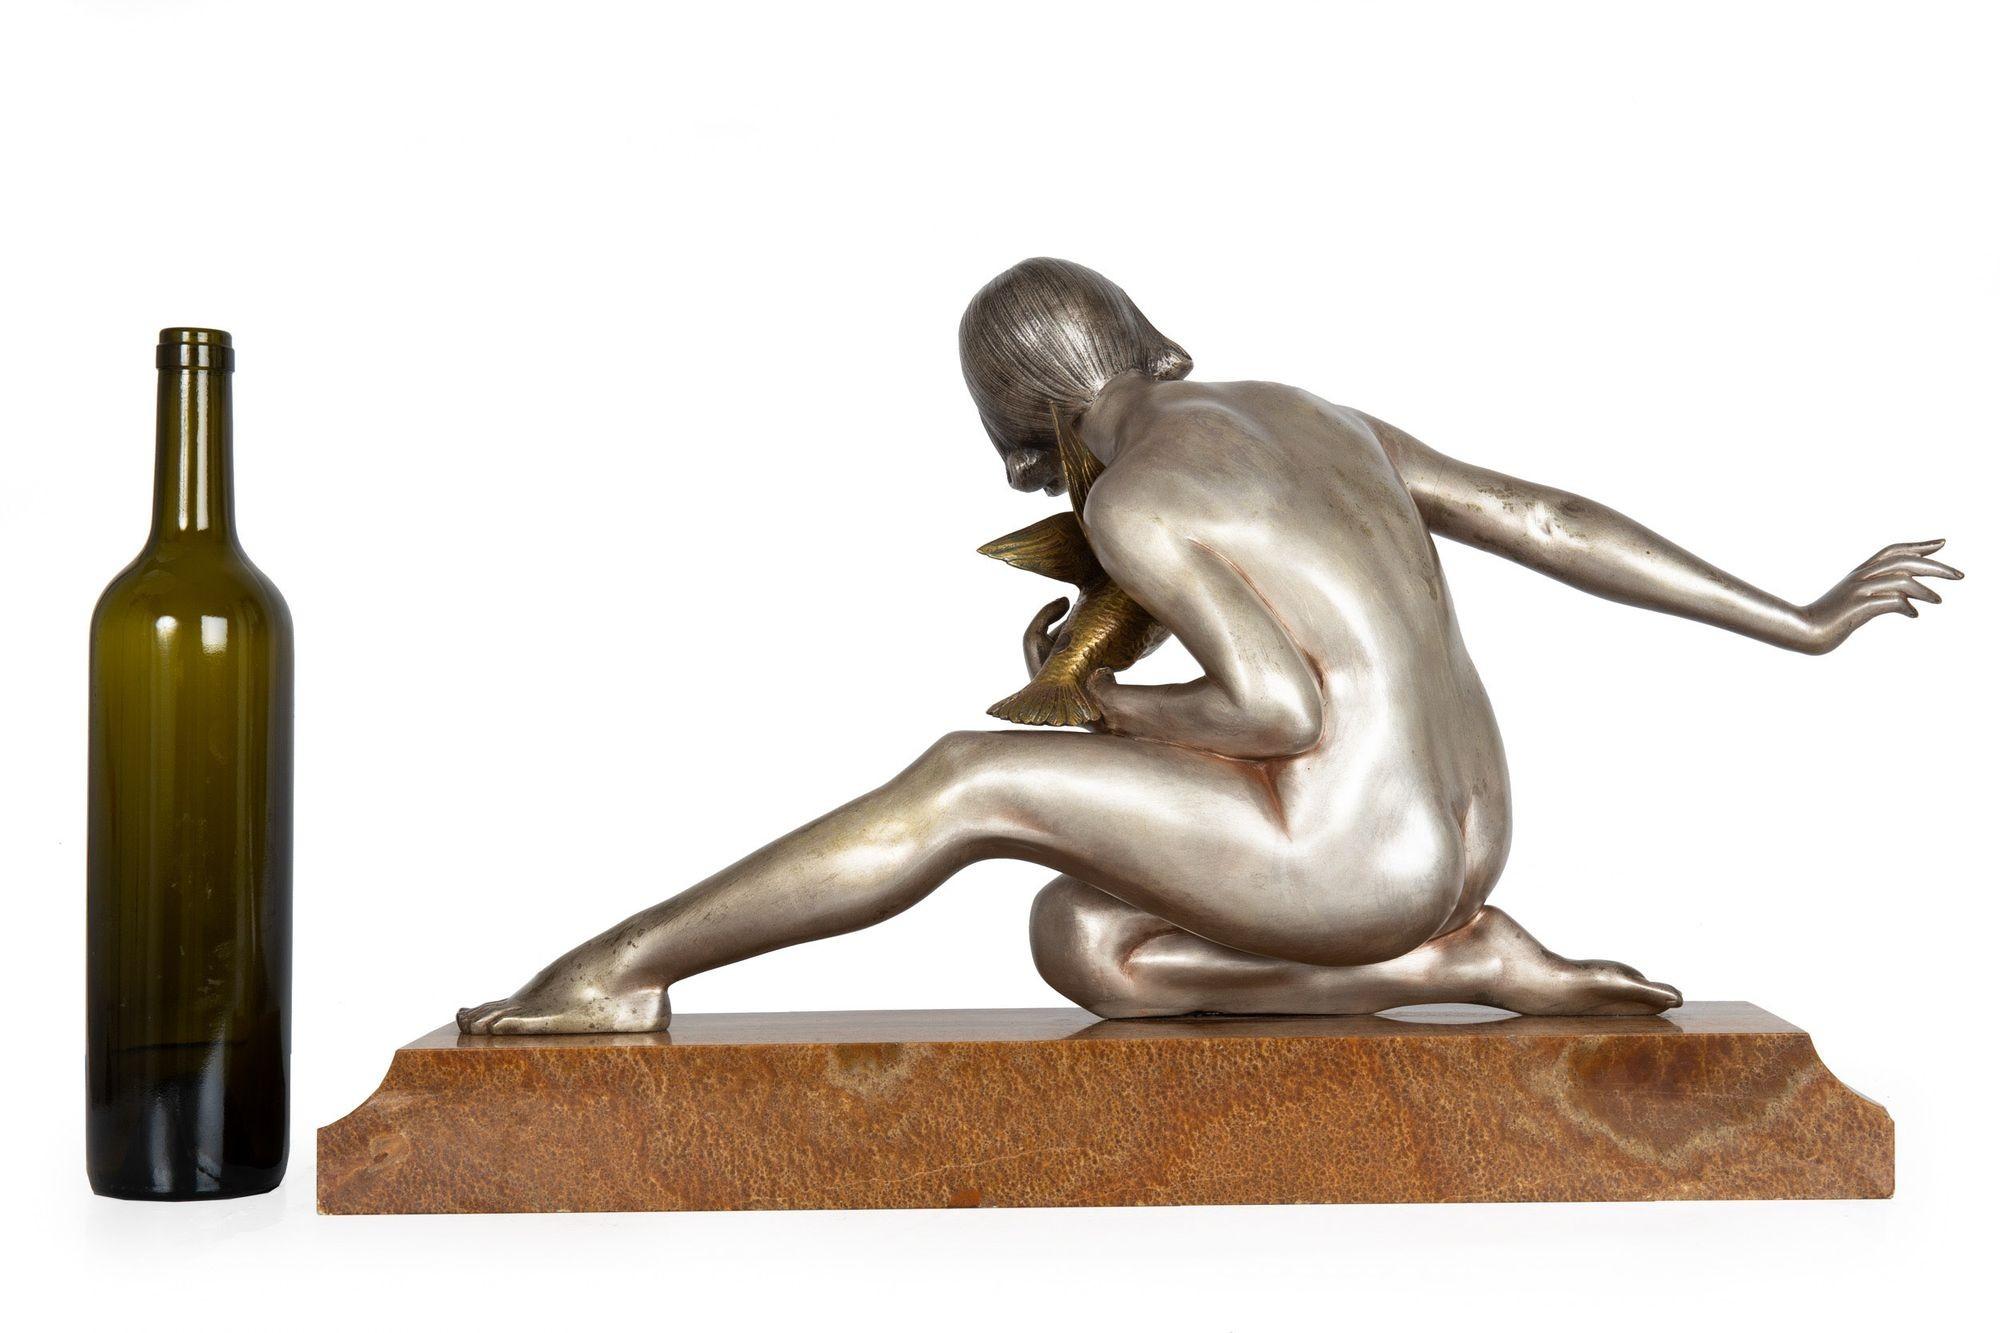 French Art Deco Silvered Bronze Sculpture “Woman w/ Bird” by Armand Godard In Good Condition For Sale In Shippensburg, PA